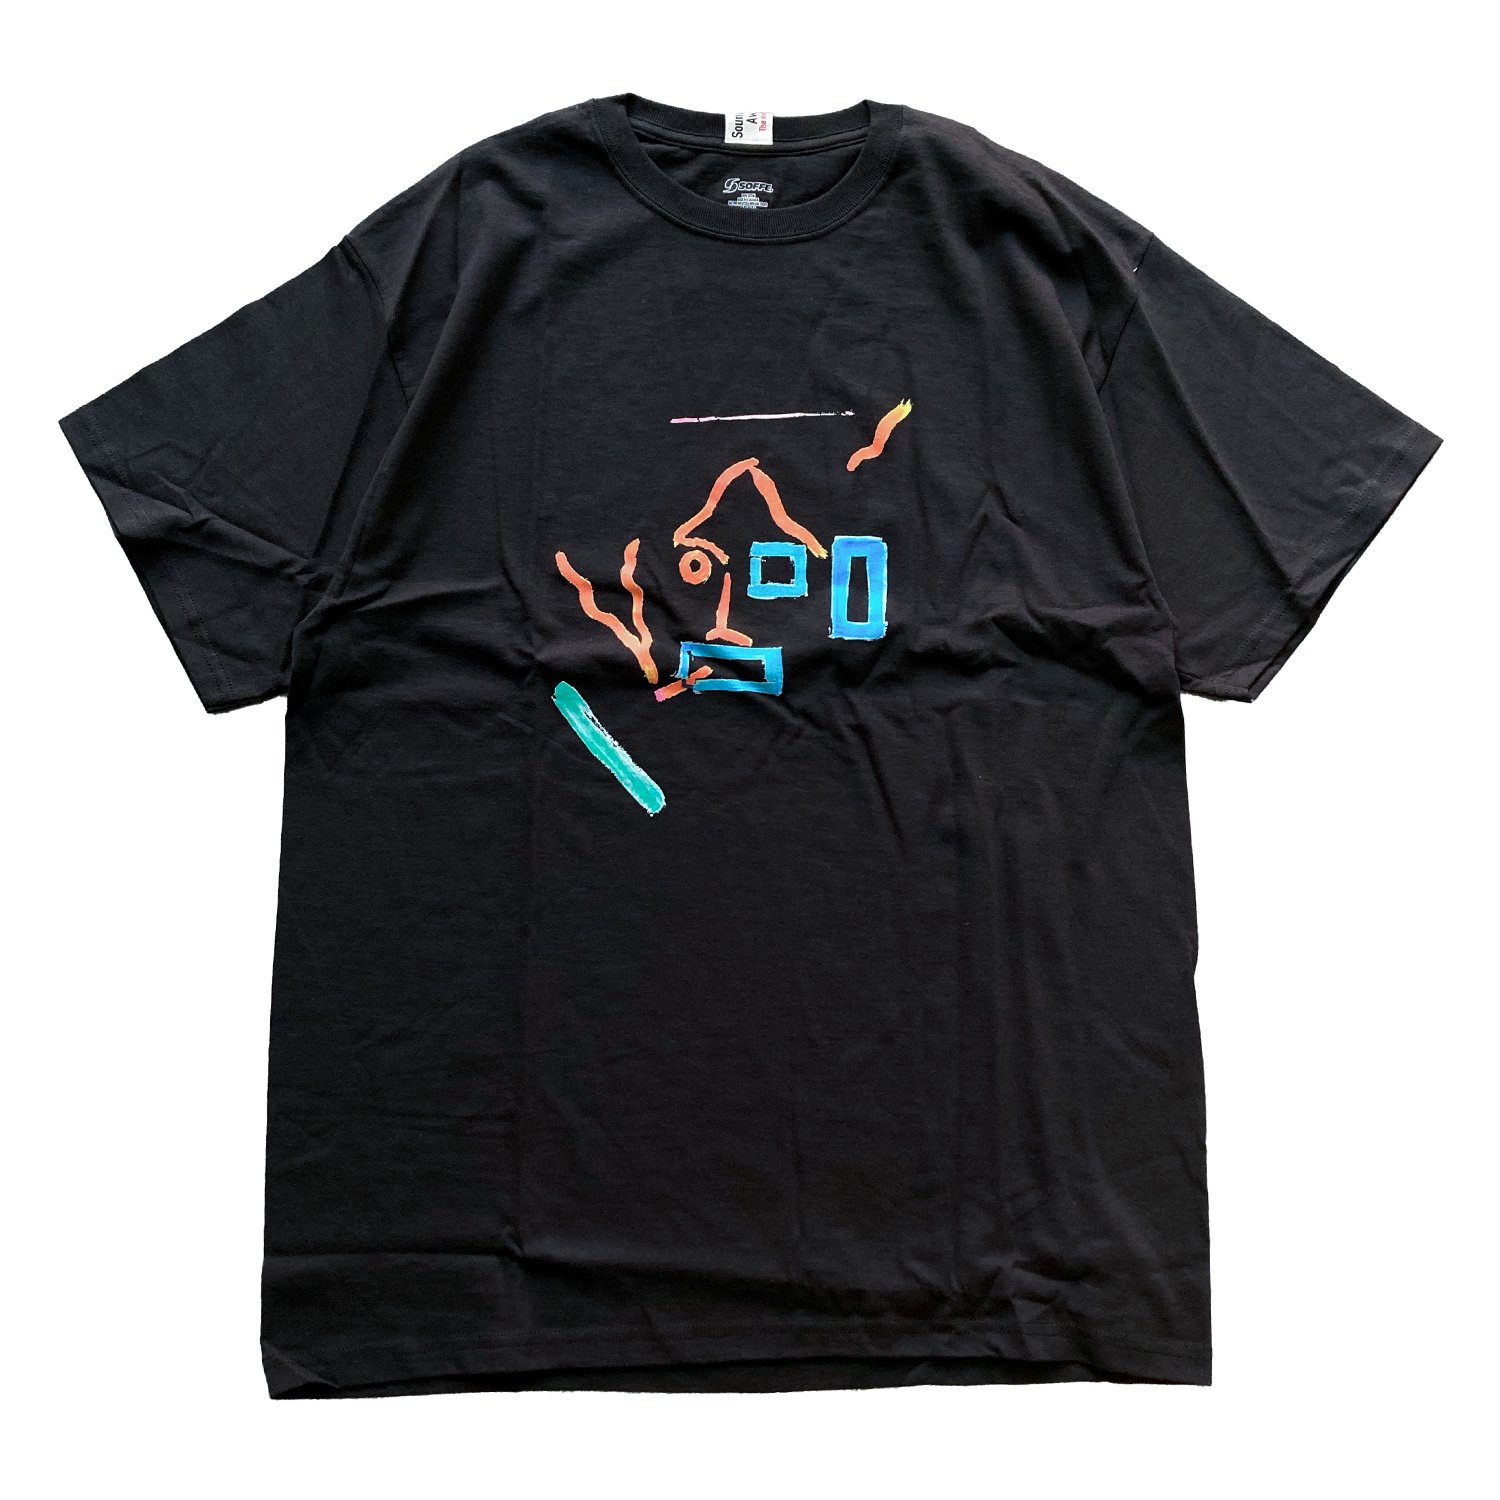 <img class='new_mark_img1' src='https://img.shop-pro.jp/img/new/icons20.gif' style='border:none;display:inline;margin:0px;padding:0px;width:auto;' />SOUNDS AWESOME / HOSONO T-shirt